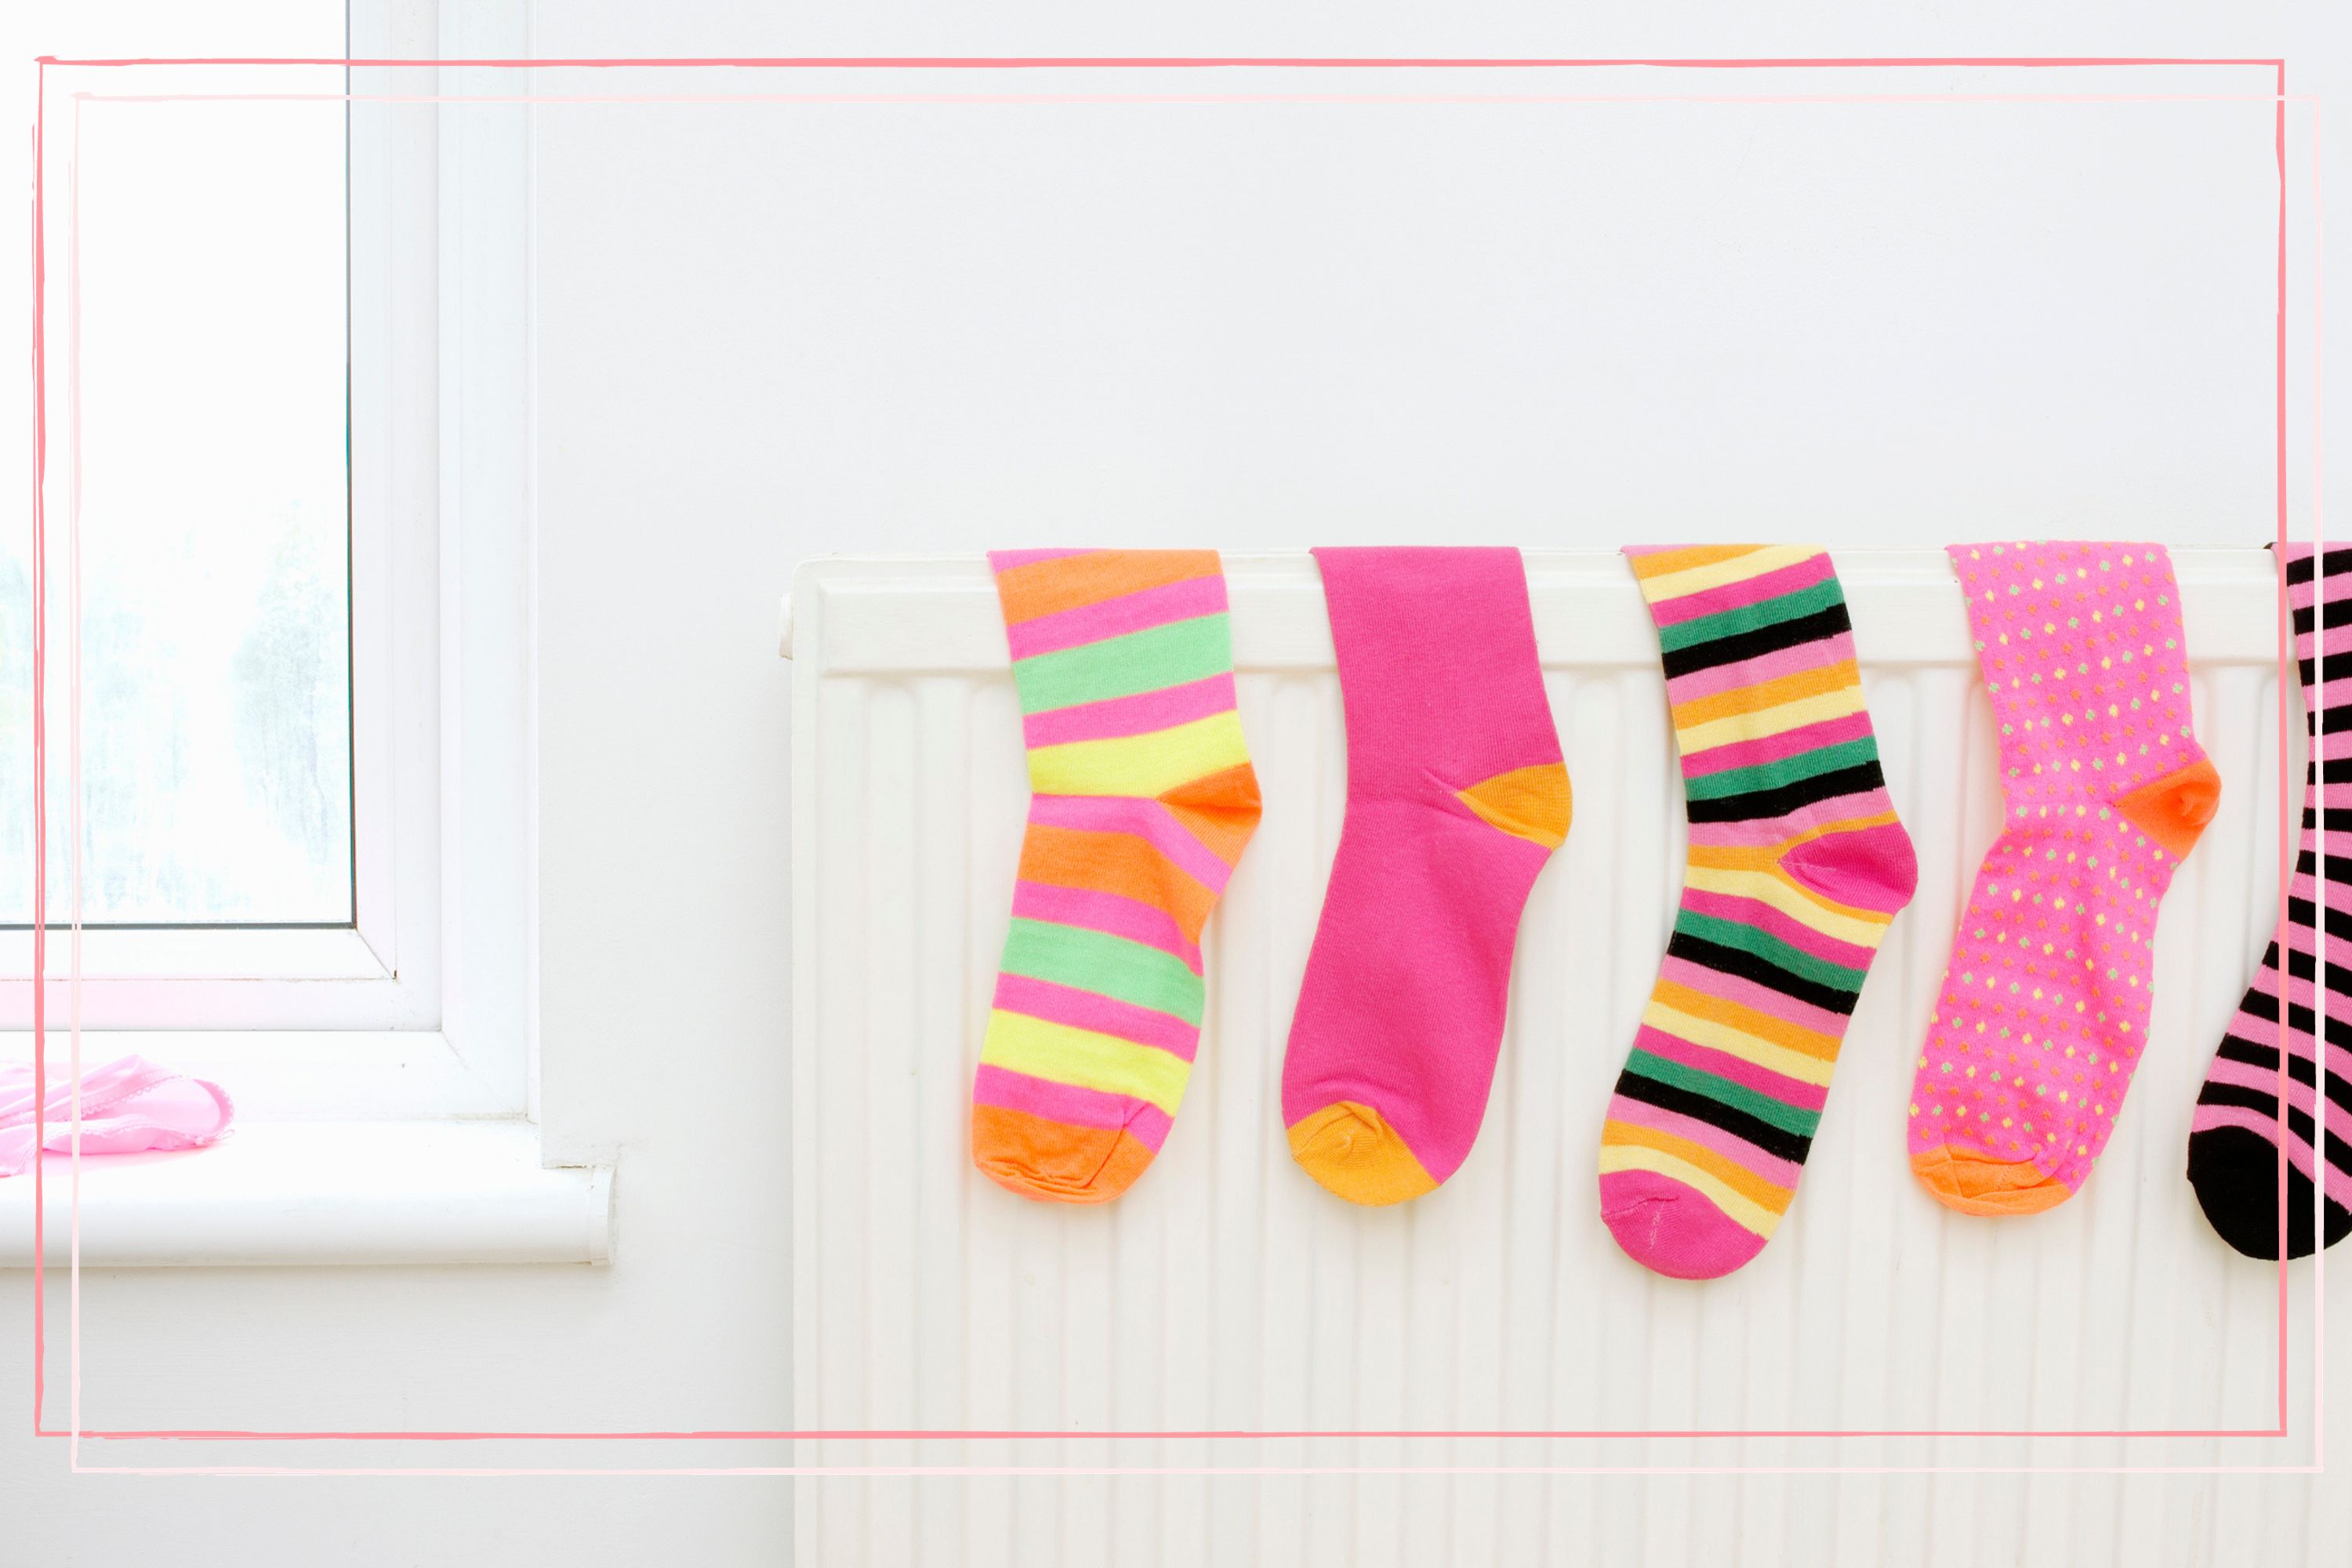 How To Dry Clothes Without A Dryer: 8 Methods!